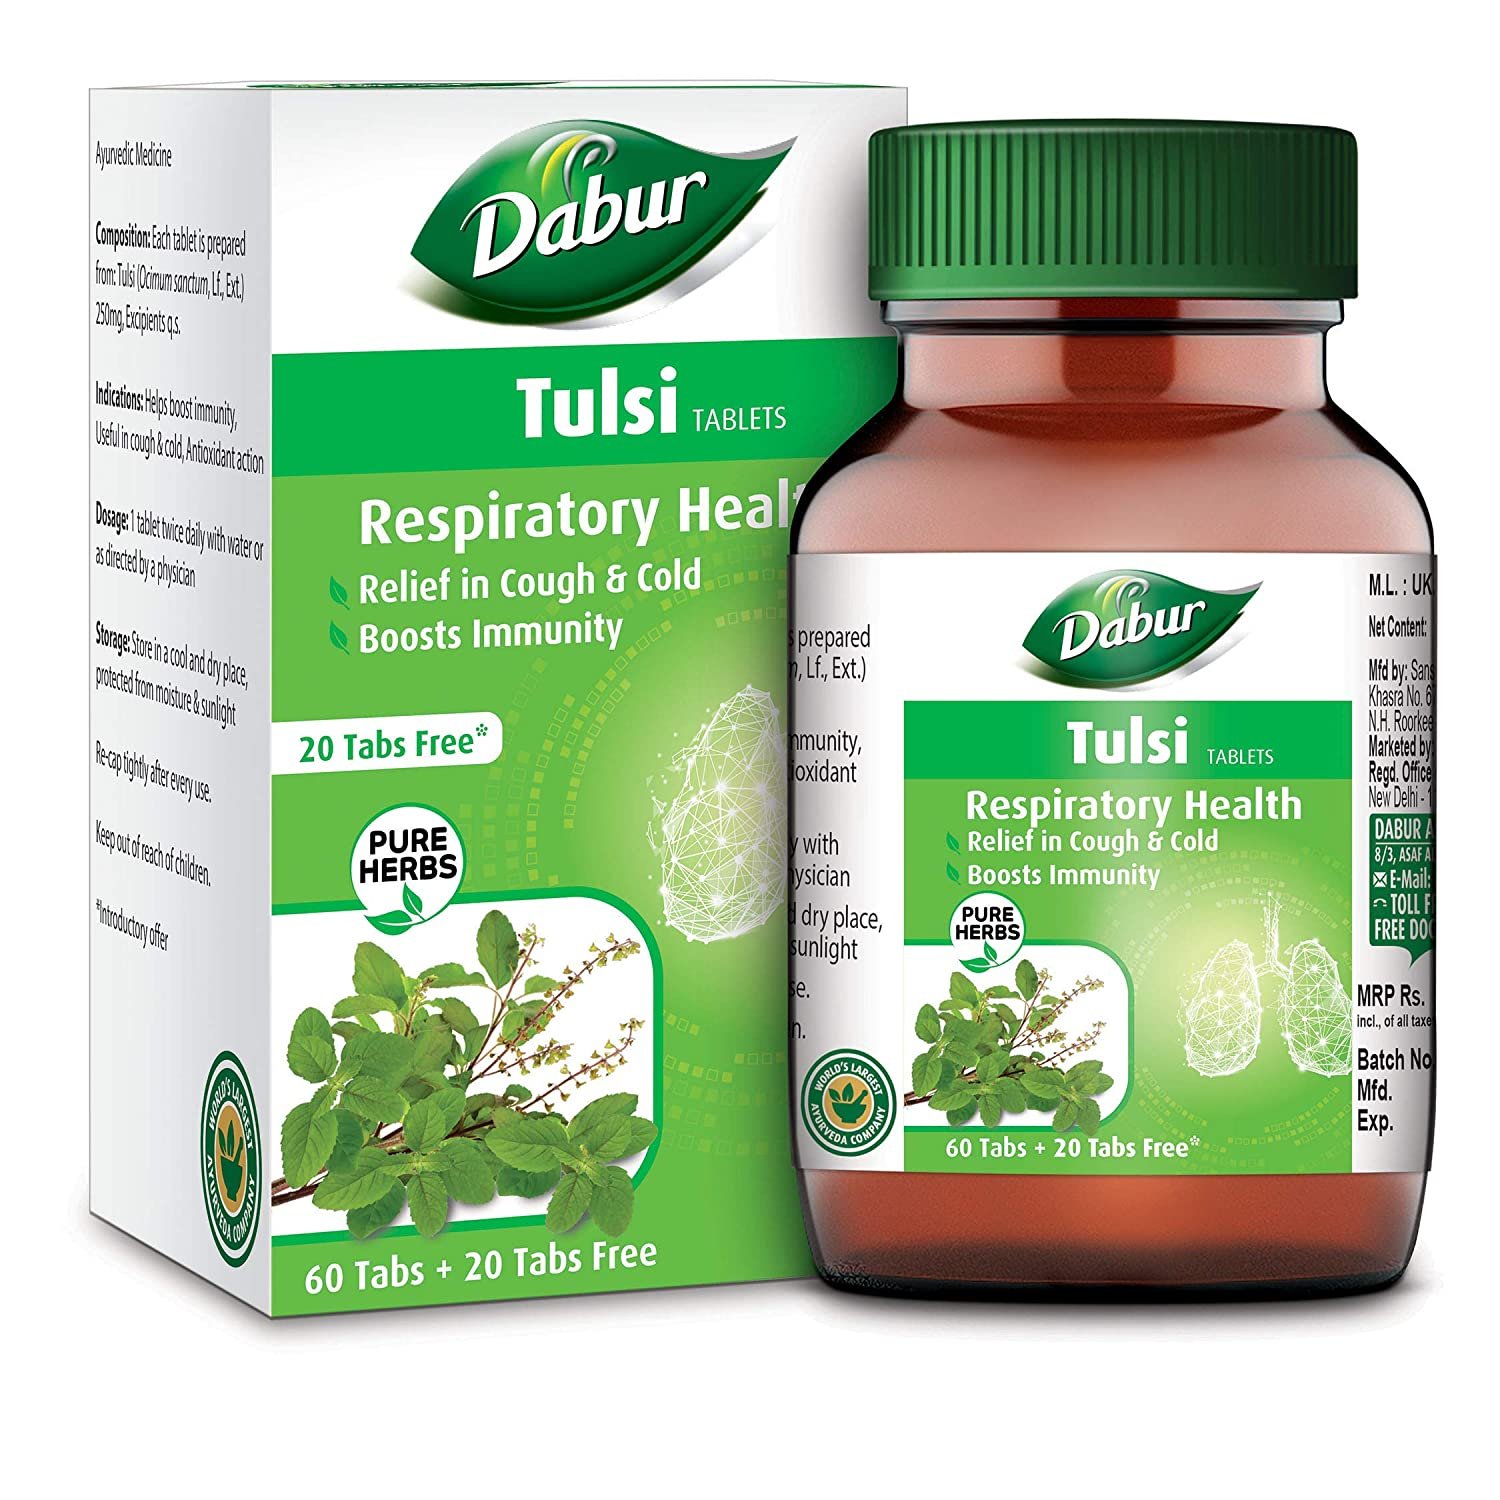 DABUR Tulsi Tablet Health | Boosts Immunity | Provides relief in Cough & Cold (60 + 20 tablets Free)